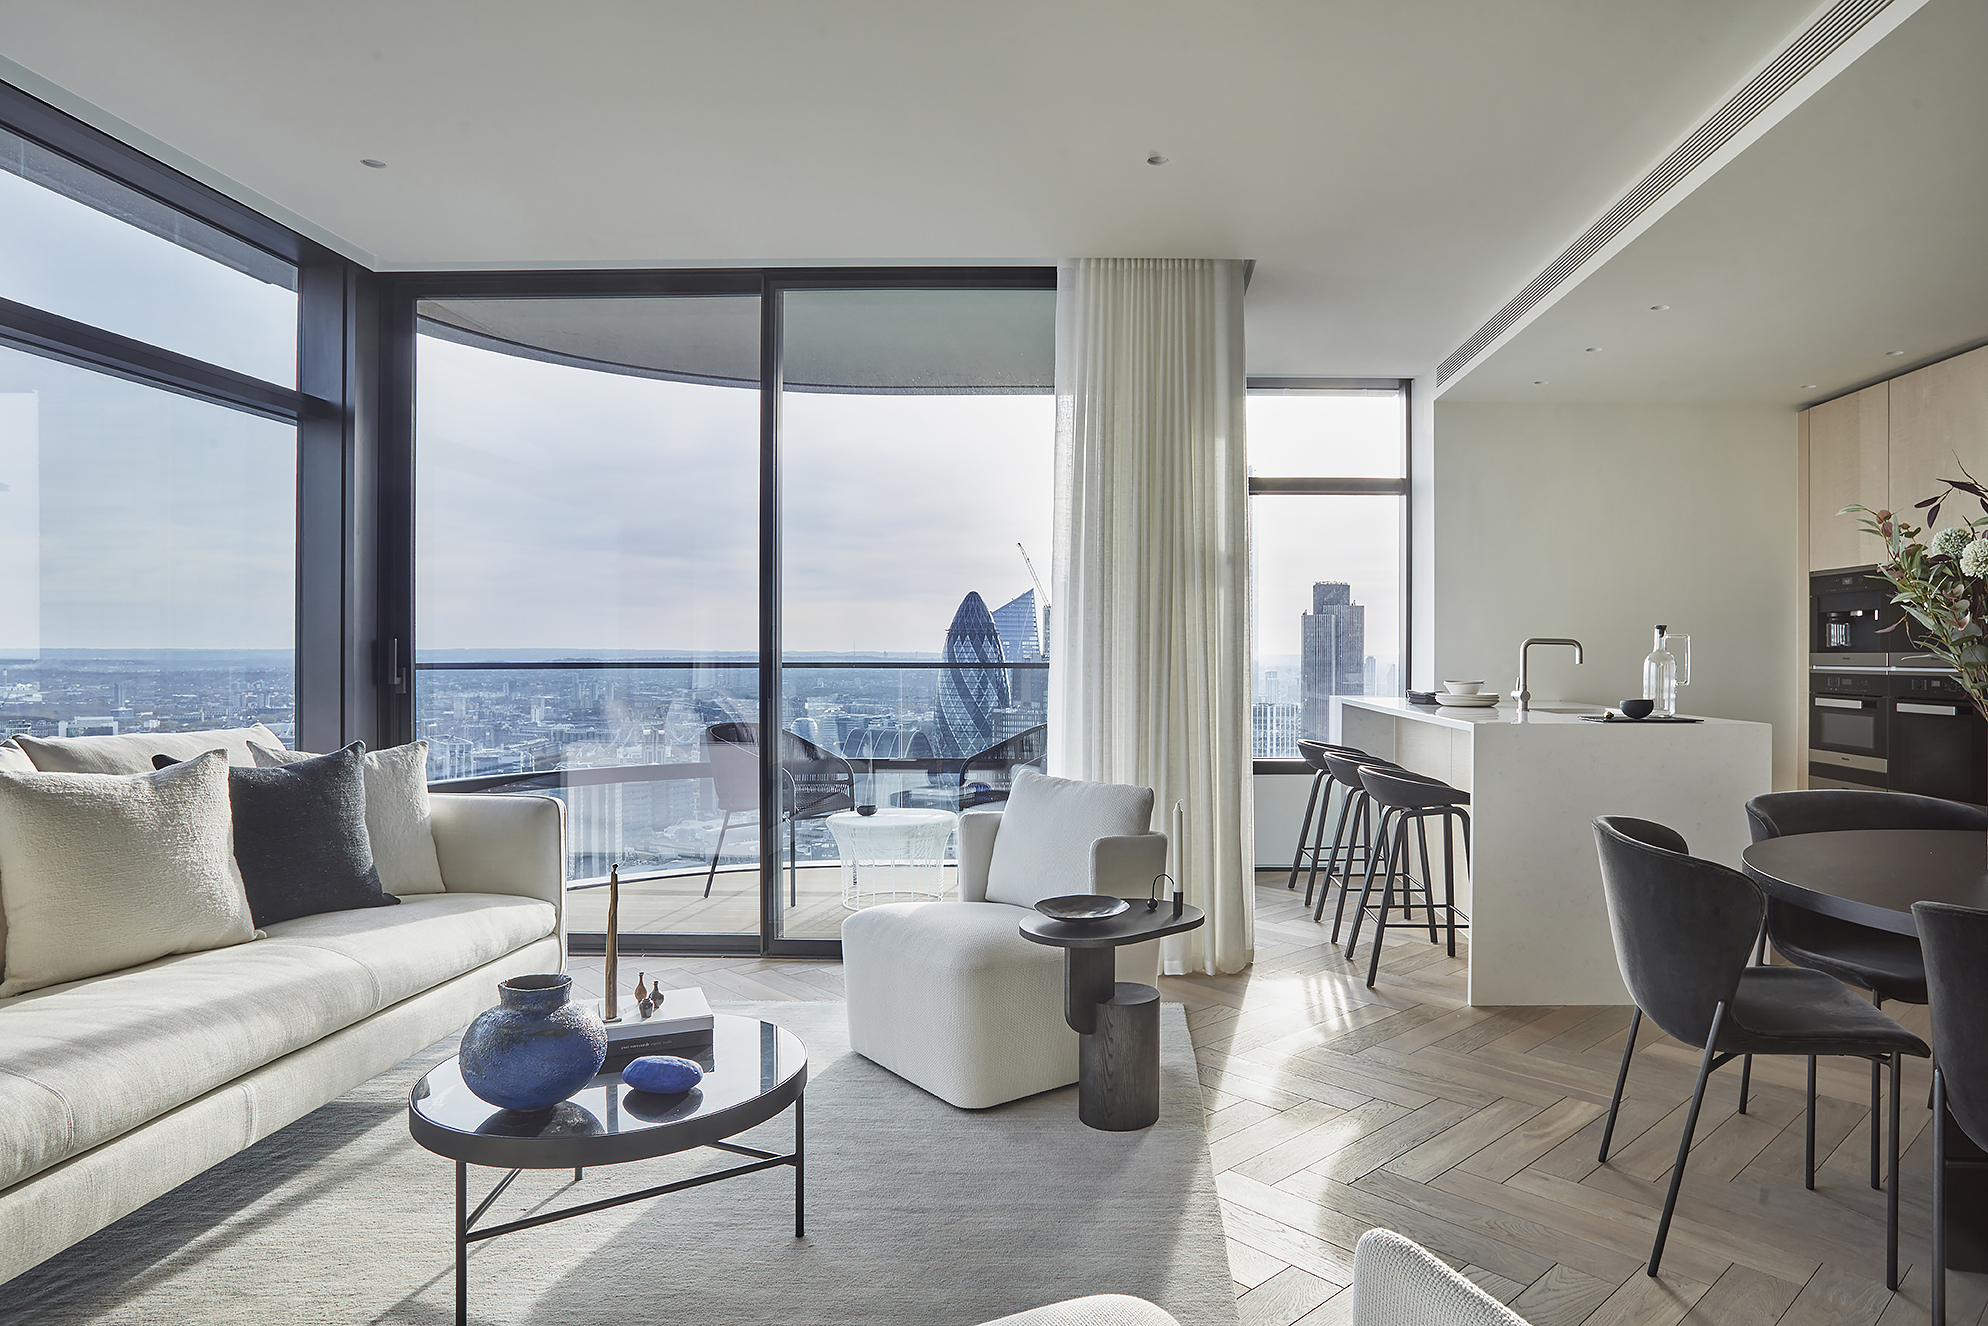 Principal Tower has become a Winner of Luxury Lifestyle Awards 2020 in the category 'The Best Luxury Real Estate in London'. – Concord London